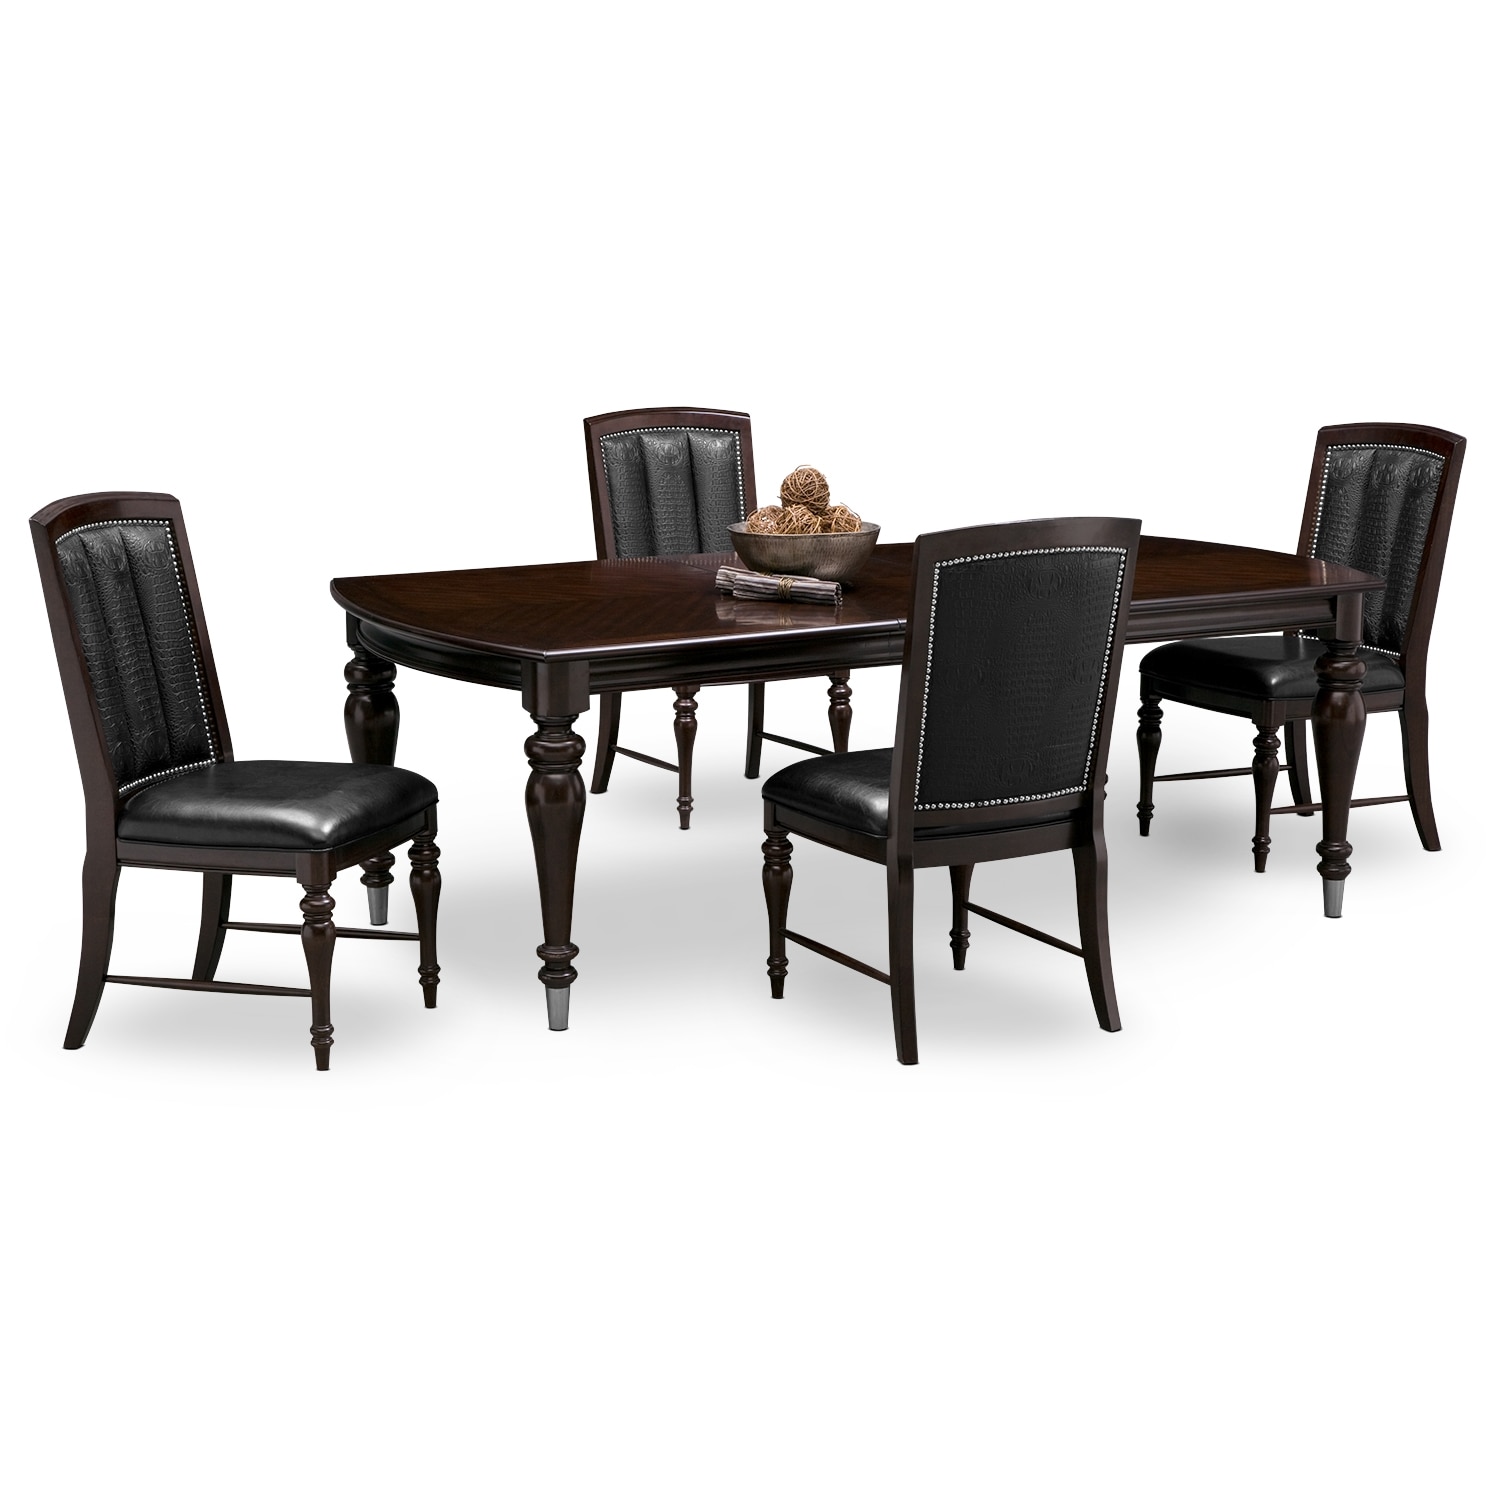 Esquire Dining Table And 4 Dining Chairs Cherry Value City Furniture